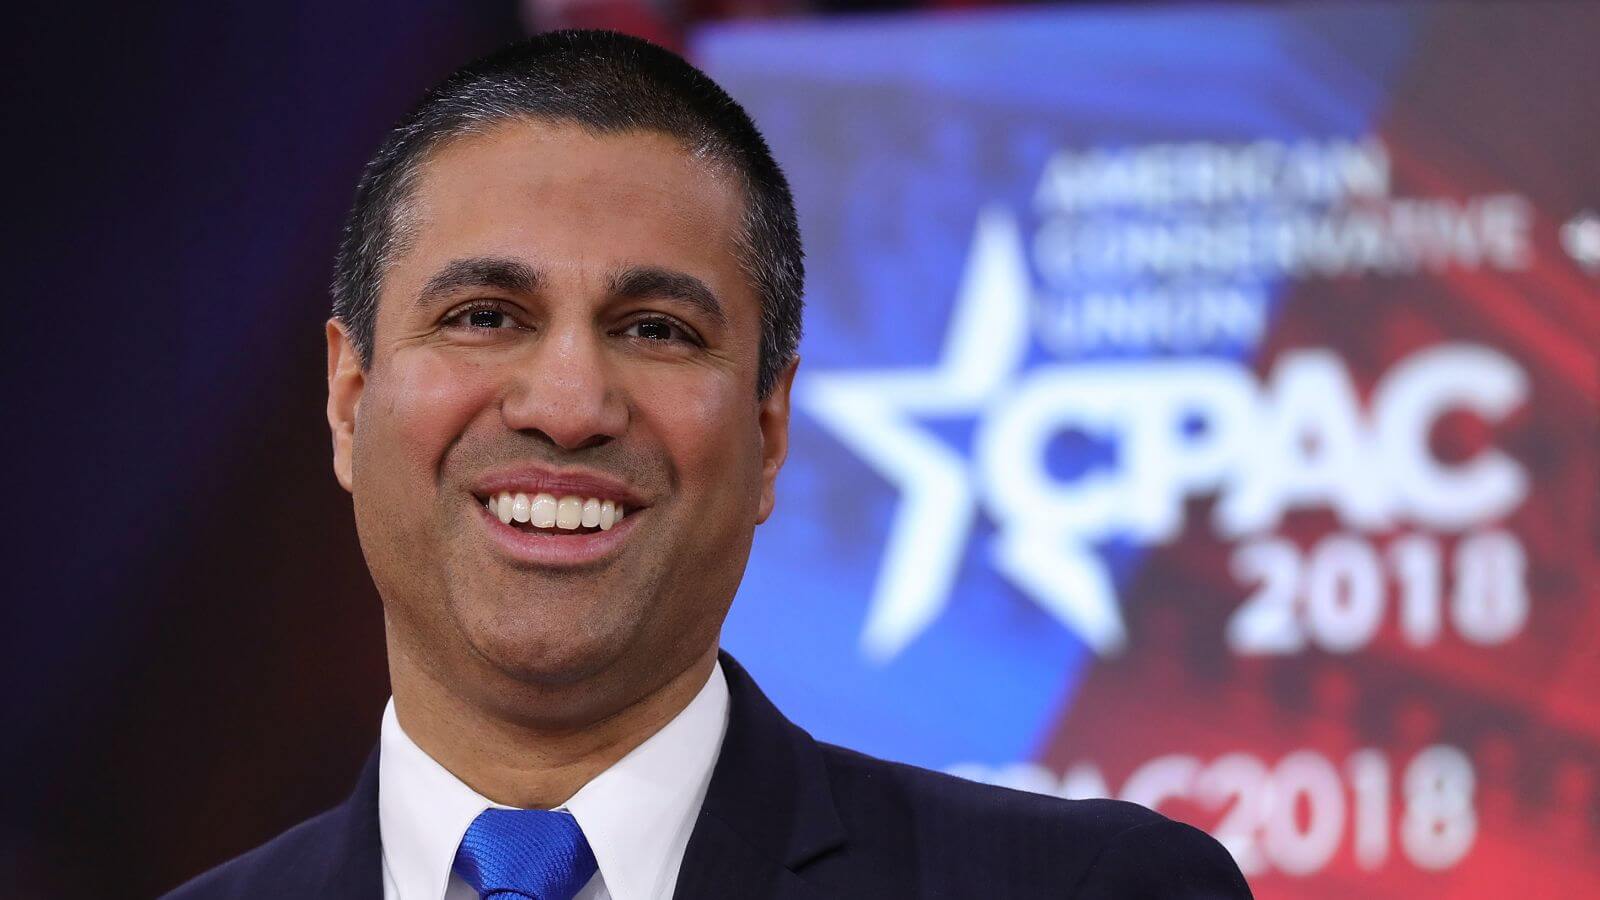 Uncovered emails reportedly show FCC made up DDoS claim and lied to reporters to cover it up